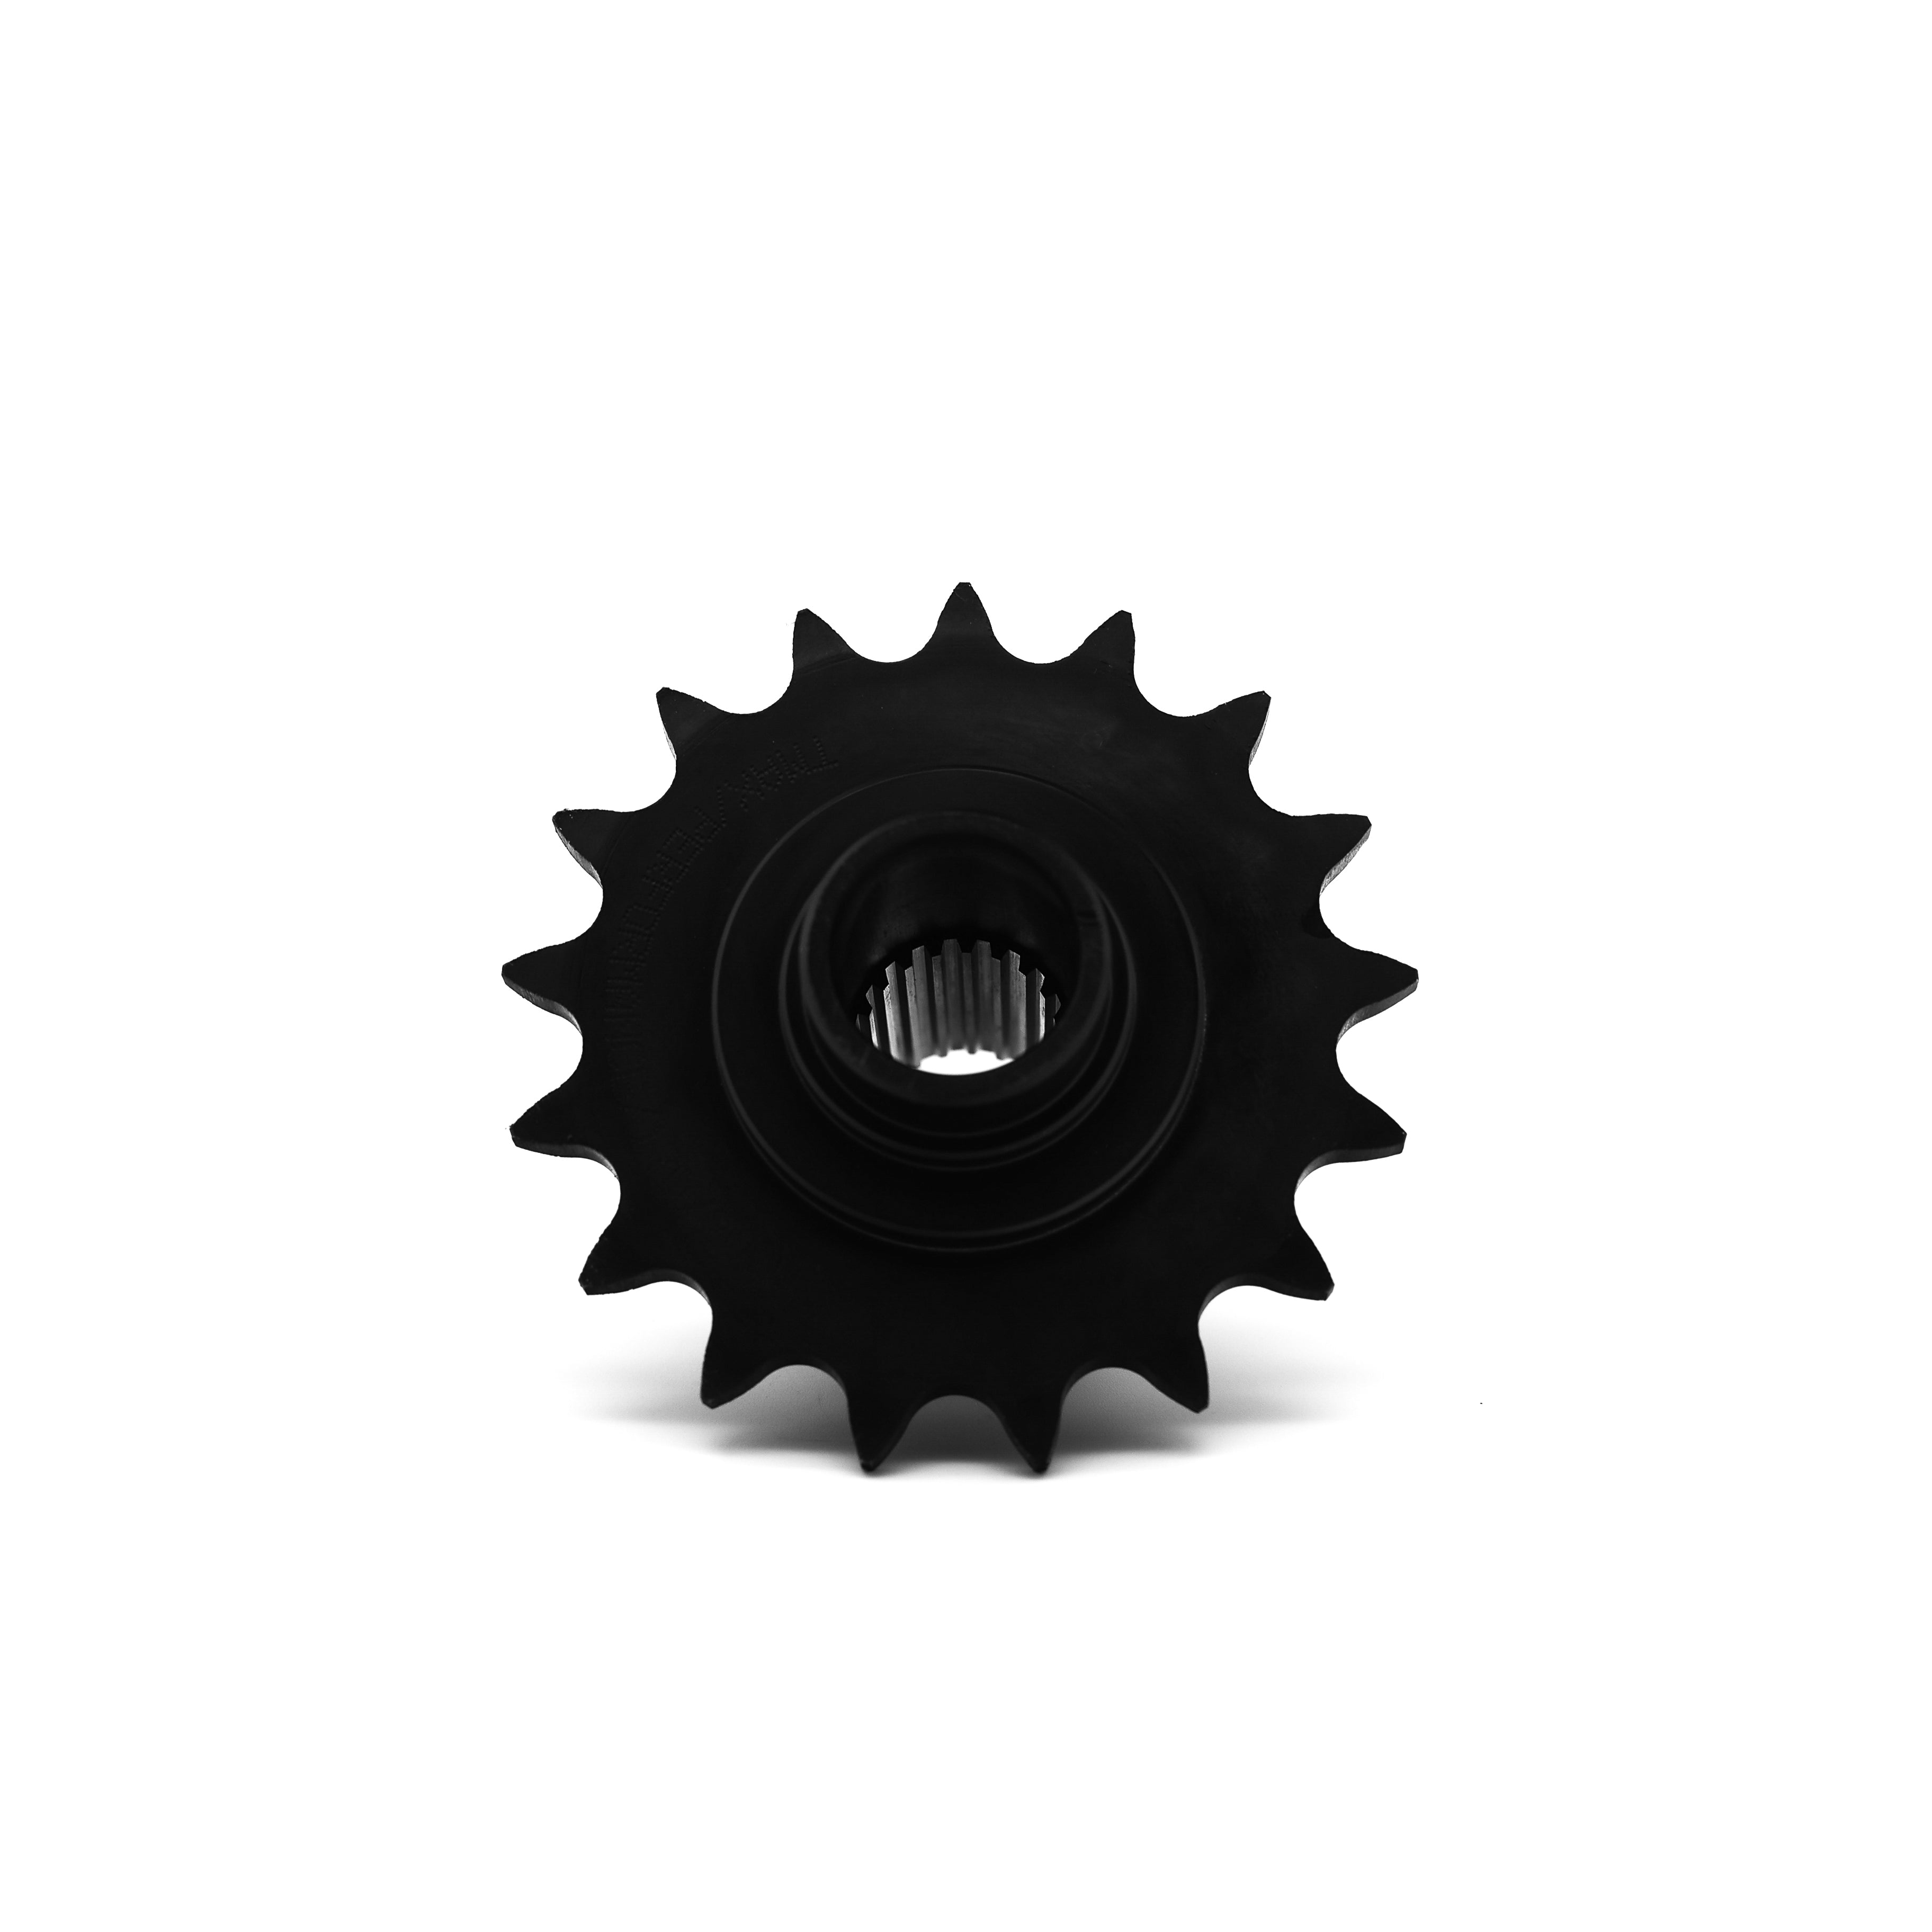 Sprocket for TMAX 560 chain kit